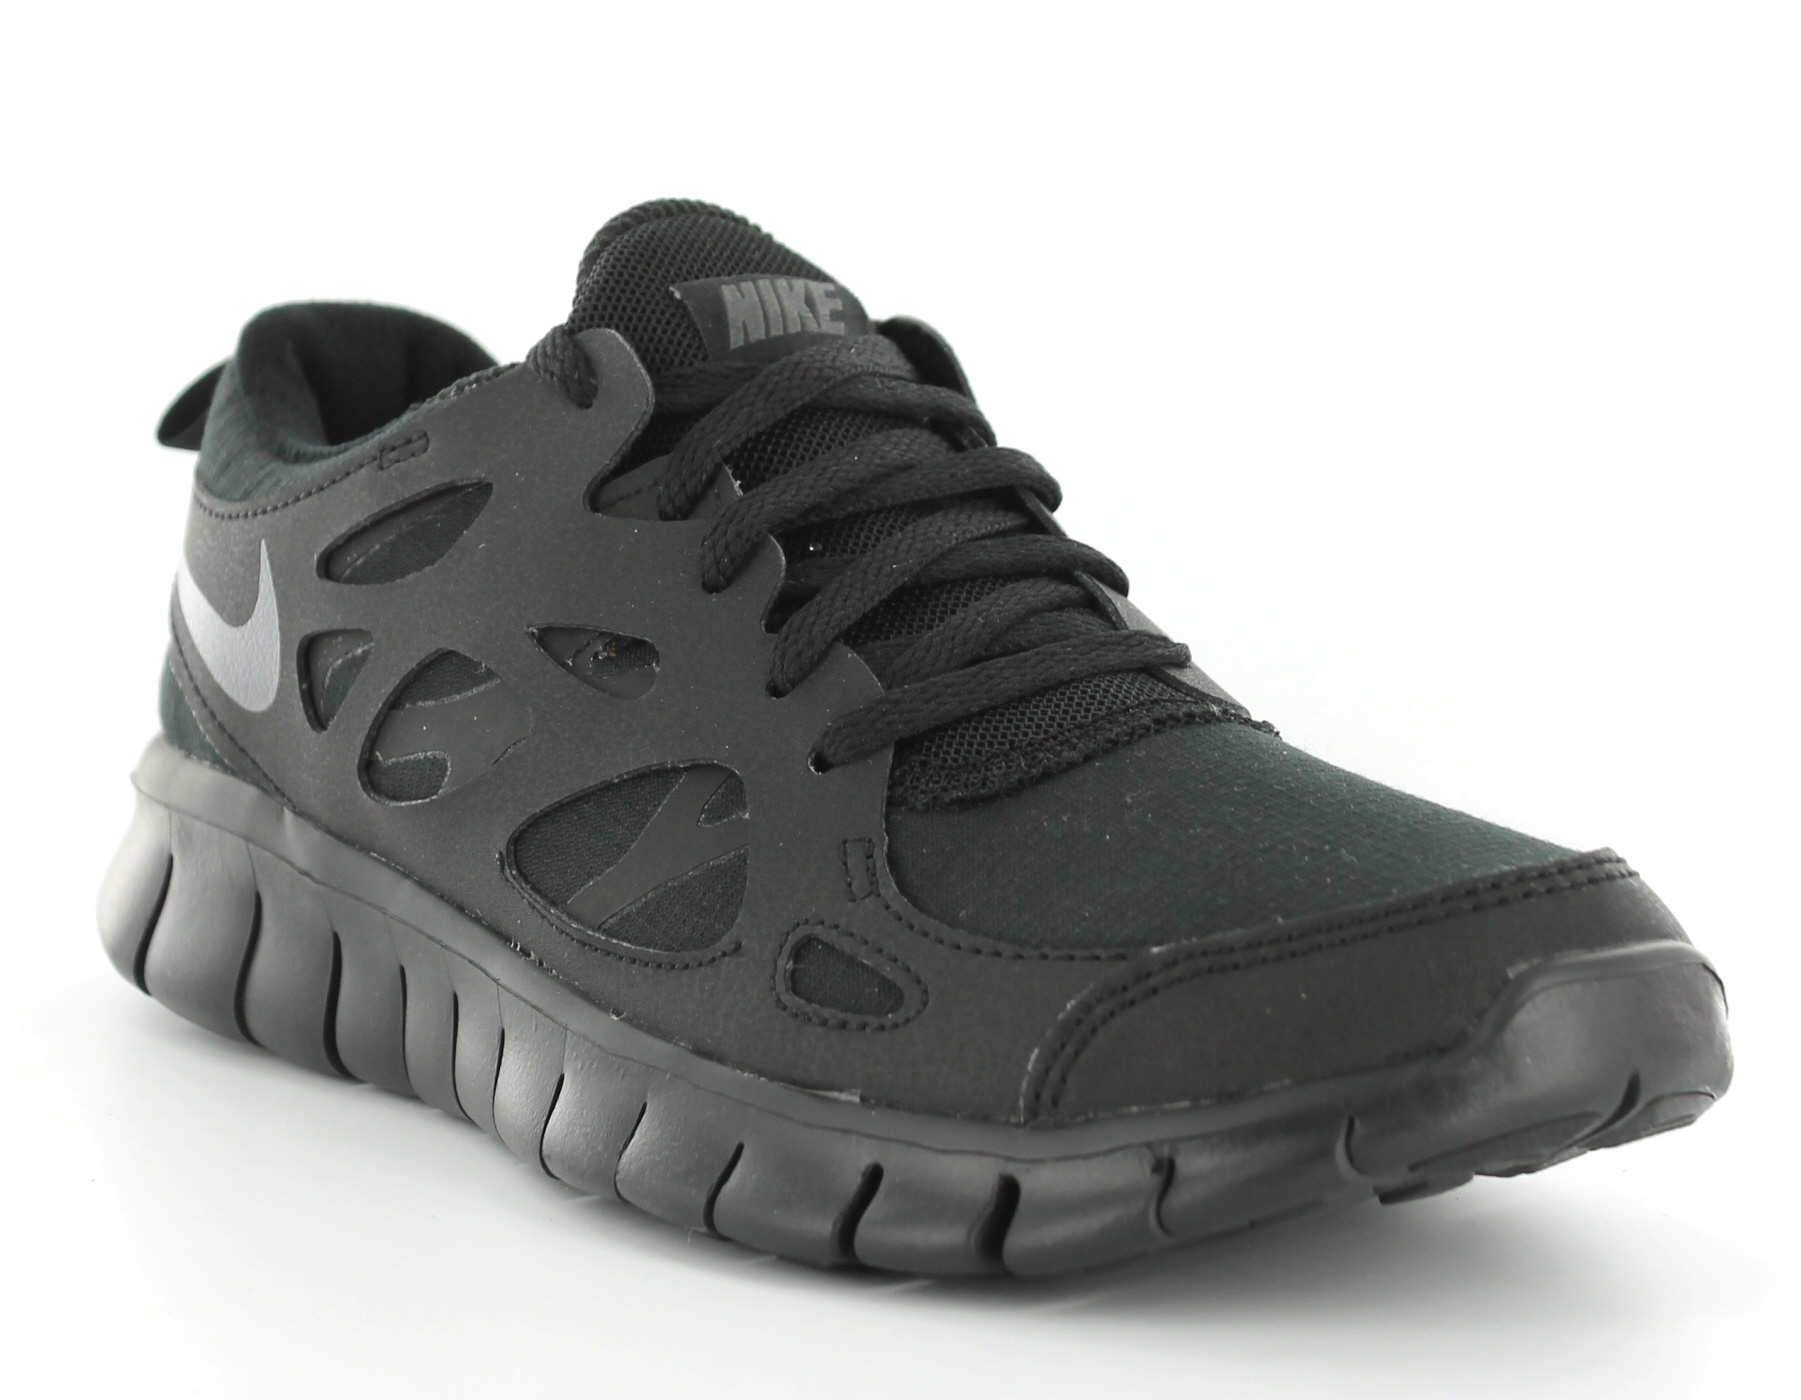 coal slot Specified Nike Free Run 2 GS NOIR/GRIS/ANTRACITE 443743-023